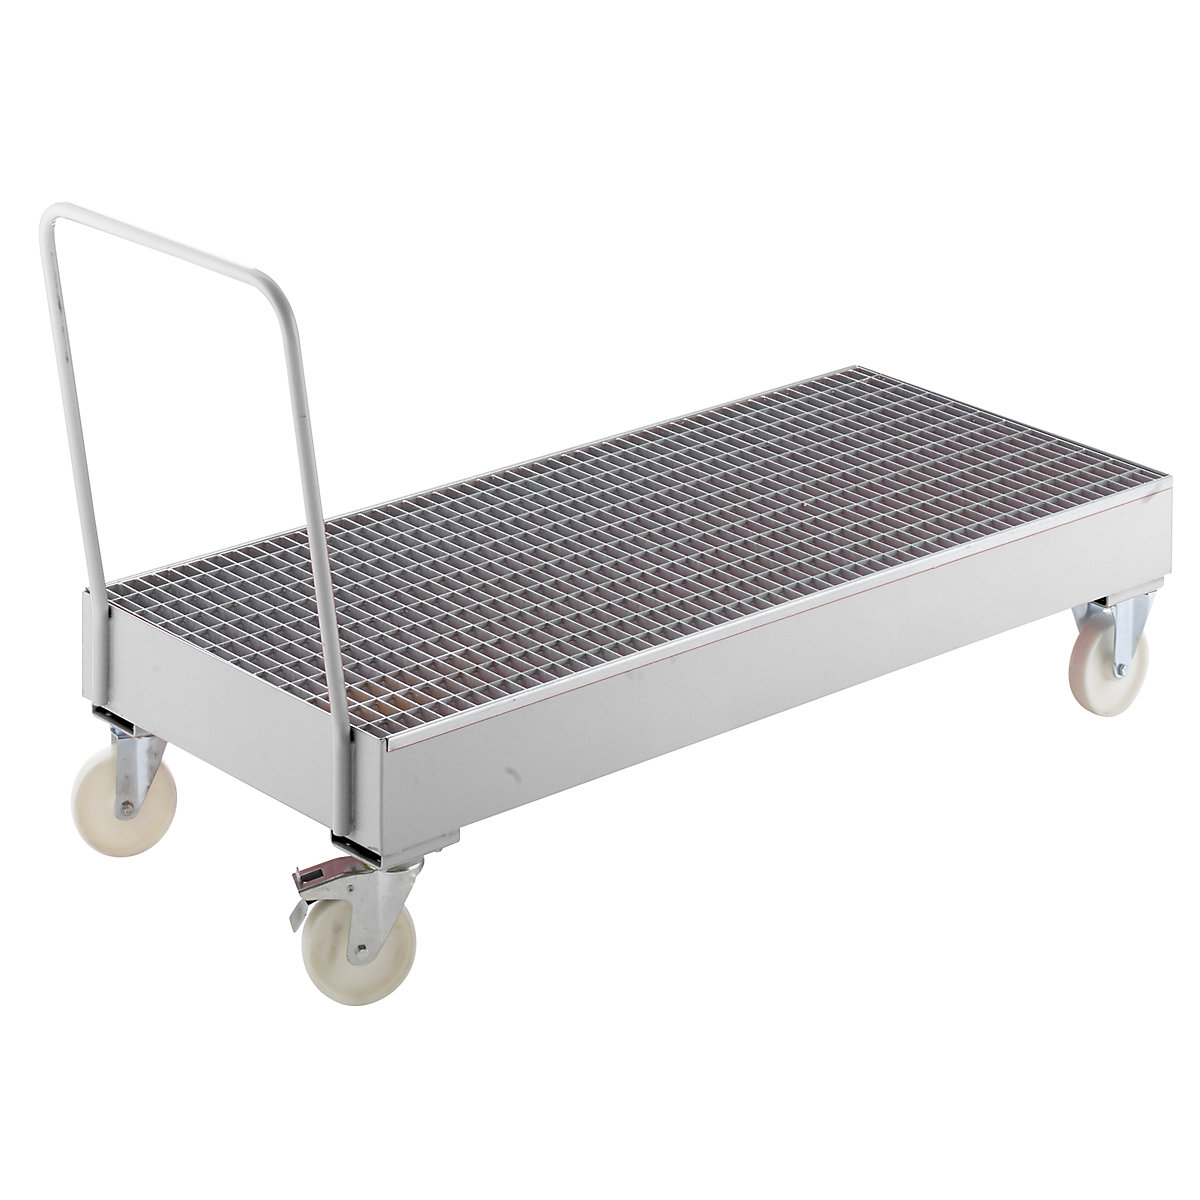 Mobile steel sump tray – eurokraft pro, for 200 l drums, 3 x upright, hot dip galvanised-4